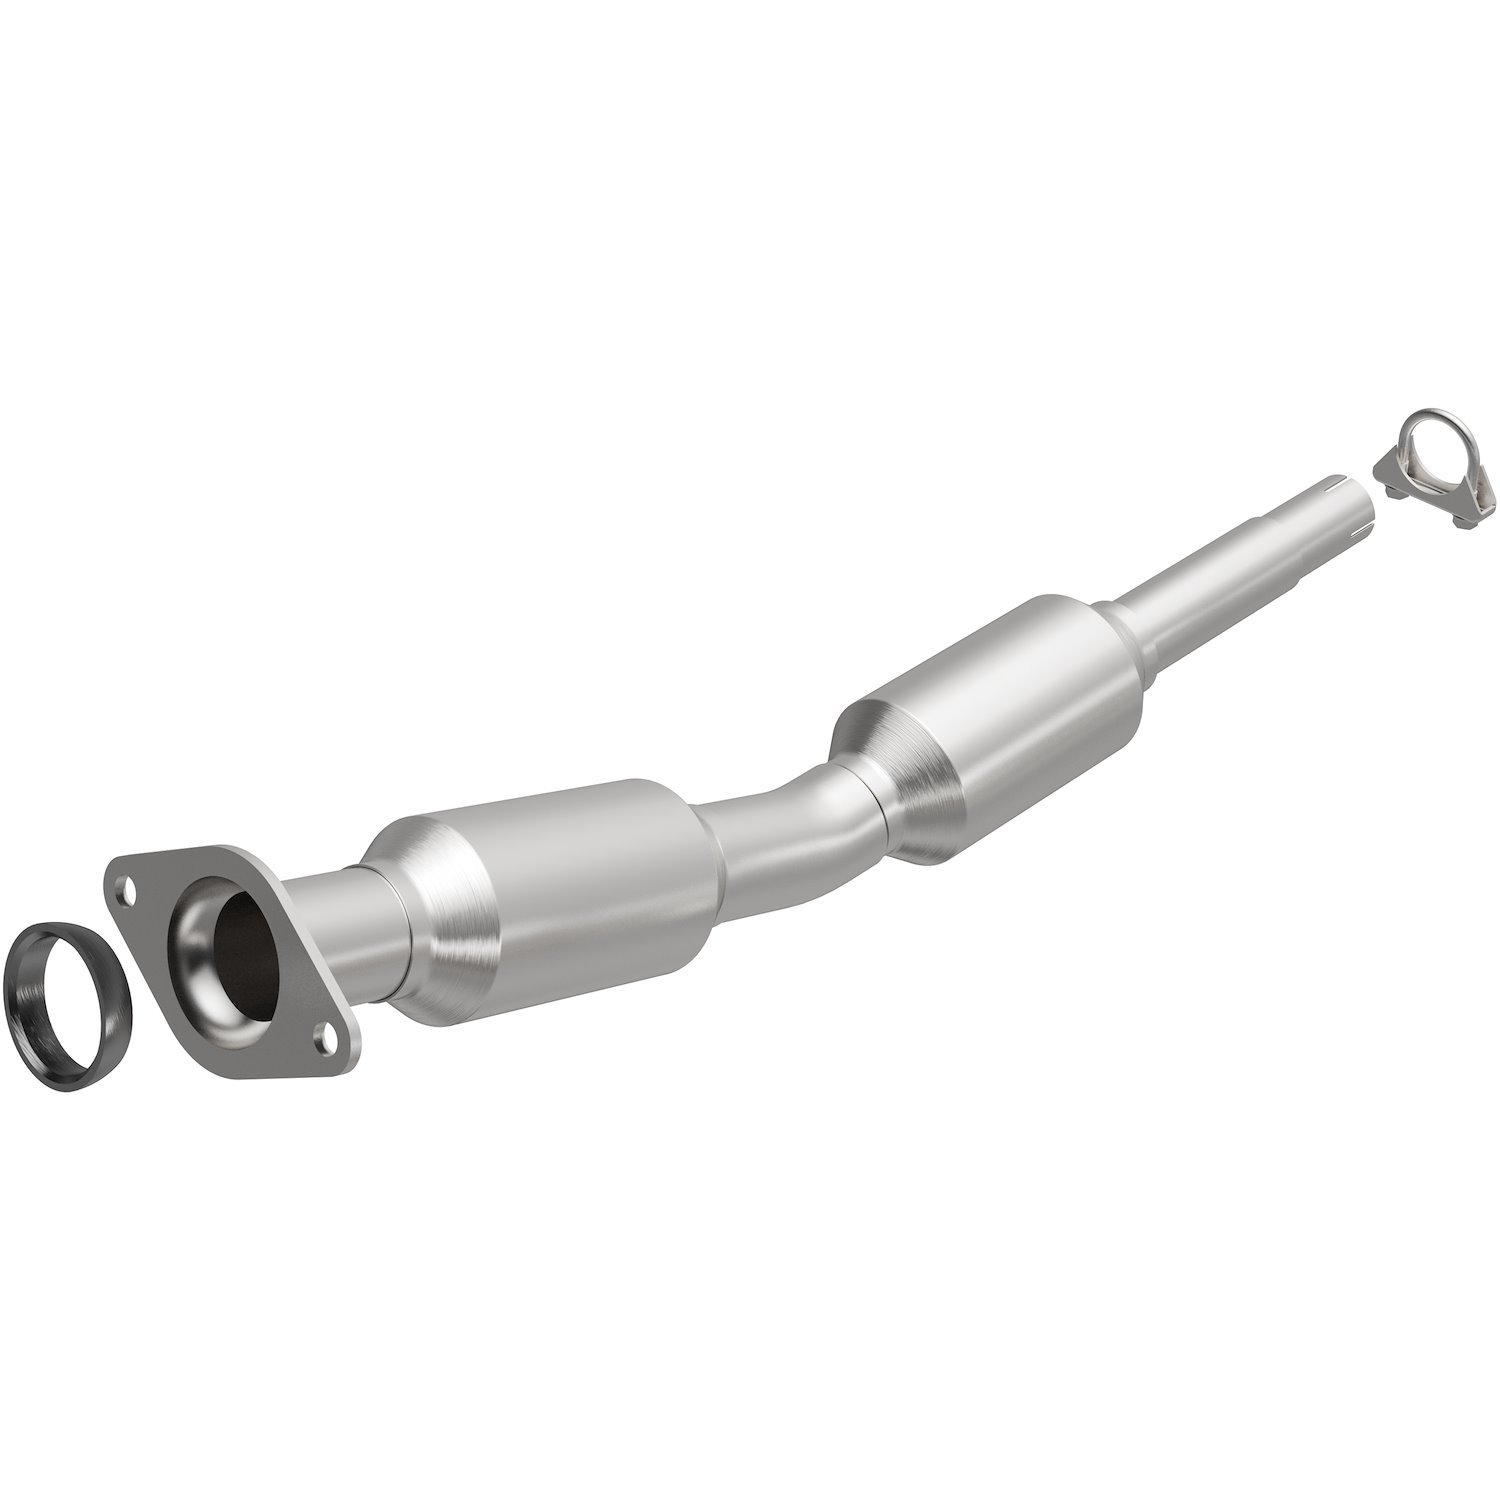 2004-2009 Toyota Prius OEM Grade Federal / EPA Compliant Direct-Fit Catalytic Converter